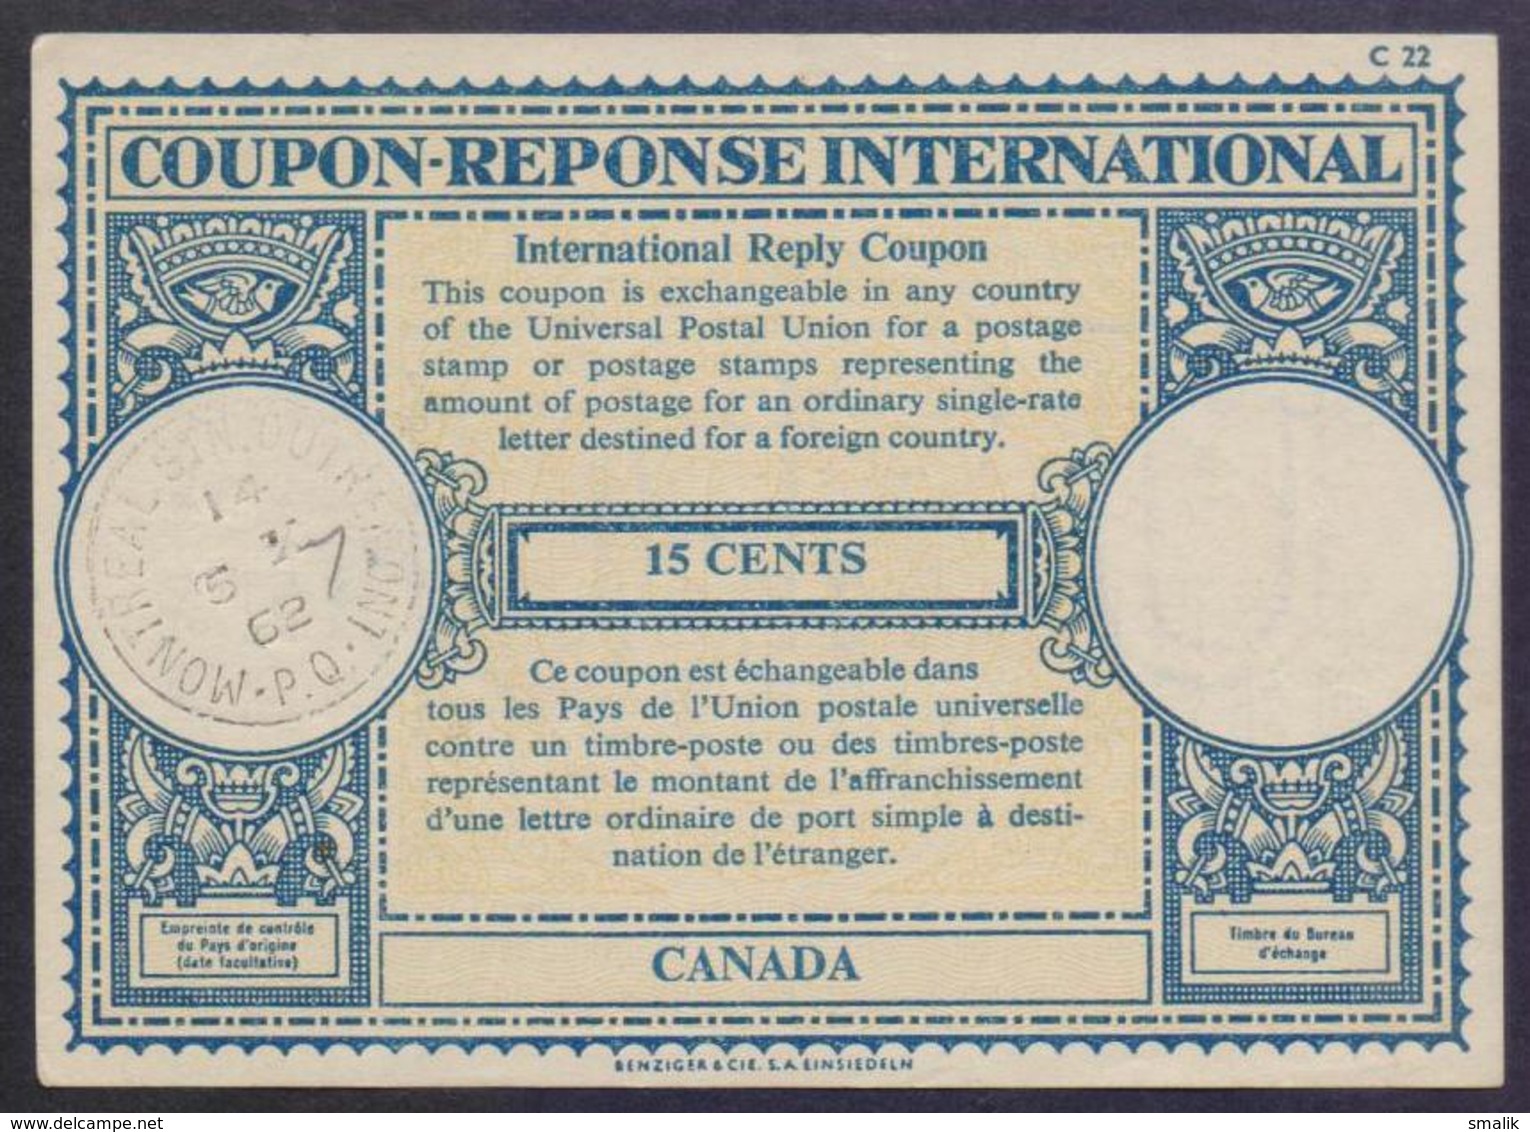 CANADA - 15 Cents London Type IRC COUPON REPONSE INTERNATIONAL REPLY, UPU, Cancelled 5.10. 1962 - Antwoordcoupons